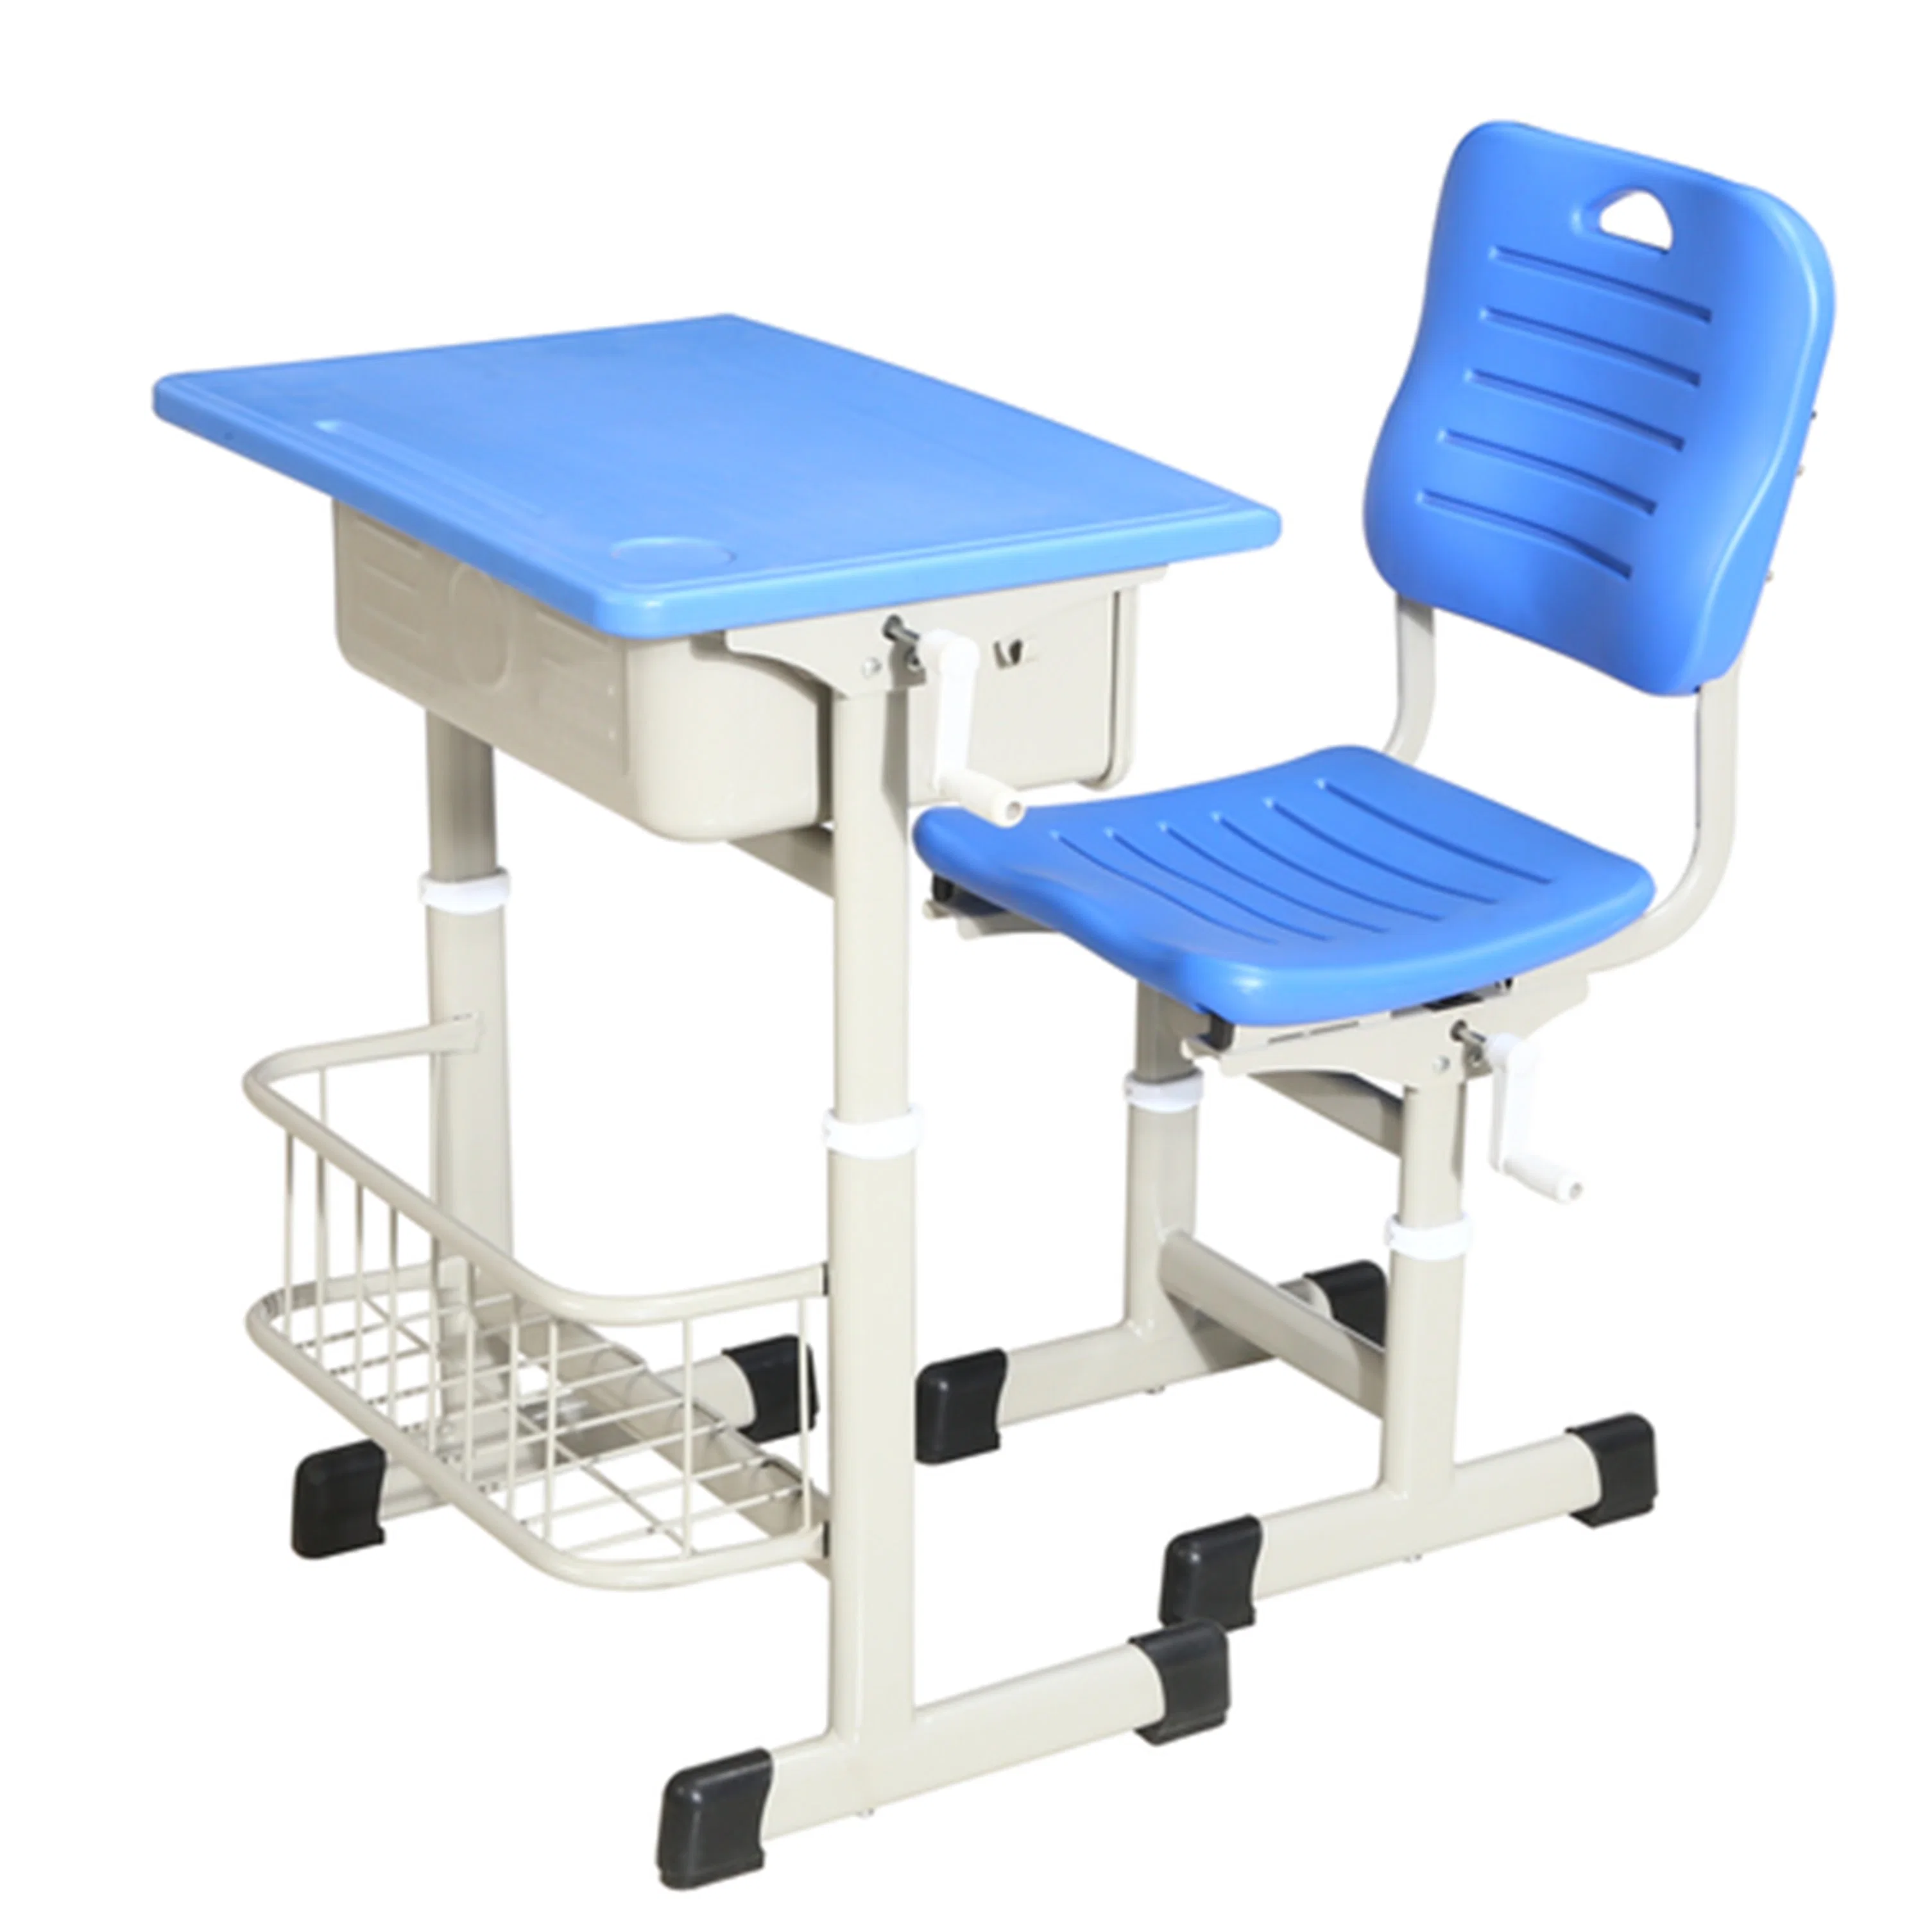 School Ladder Classroom Student Study Child Educational Furniture Adjustbale Table Desk Lecture Hall Seating College University Auditorium Train Desk Seat Chair